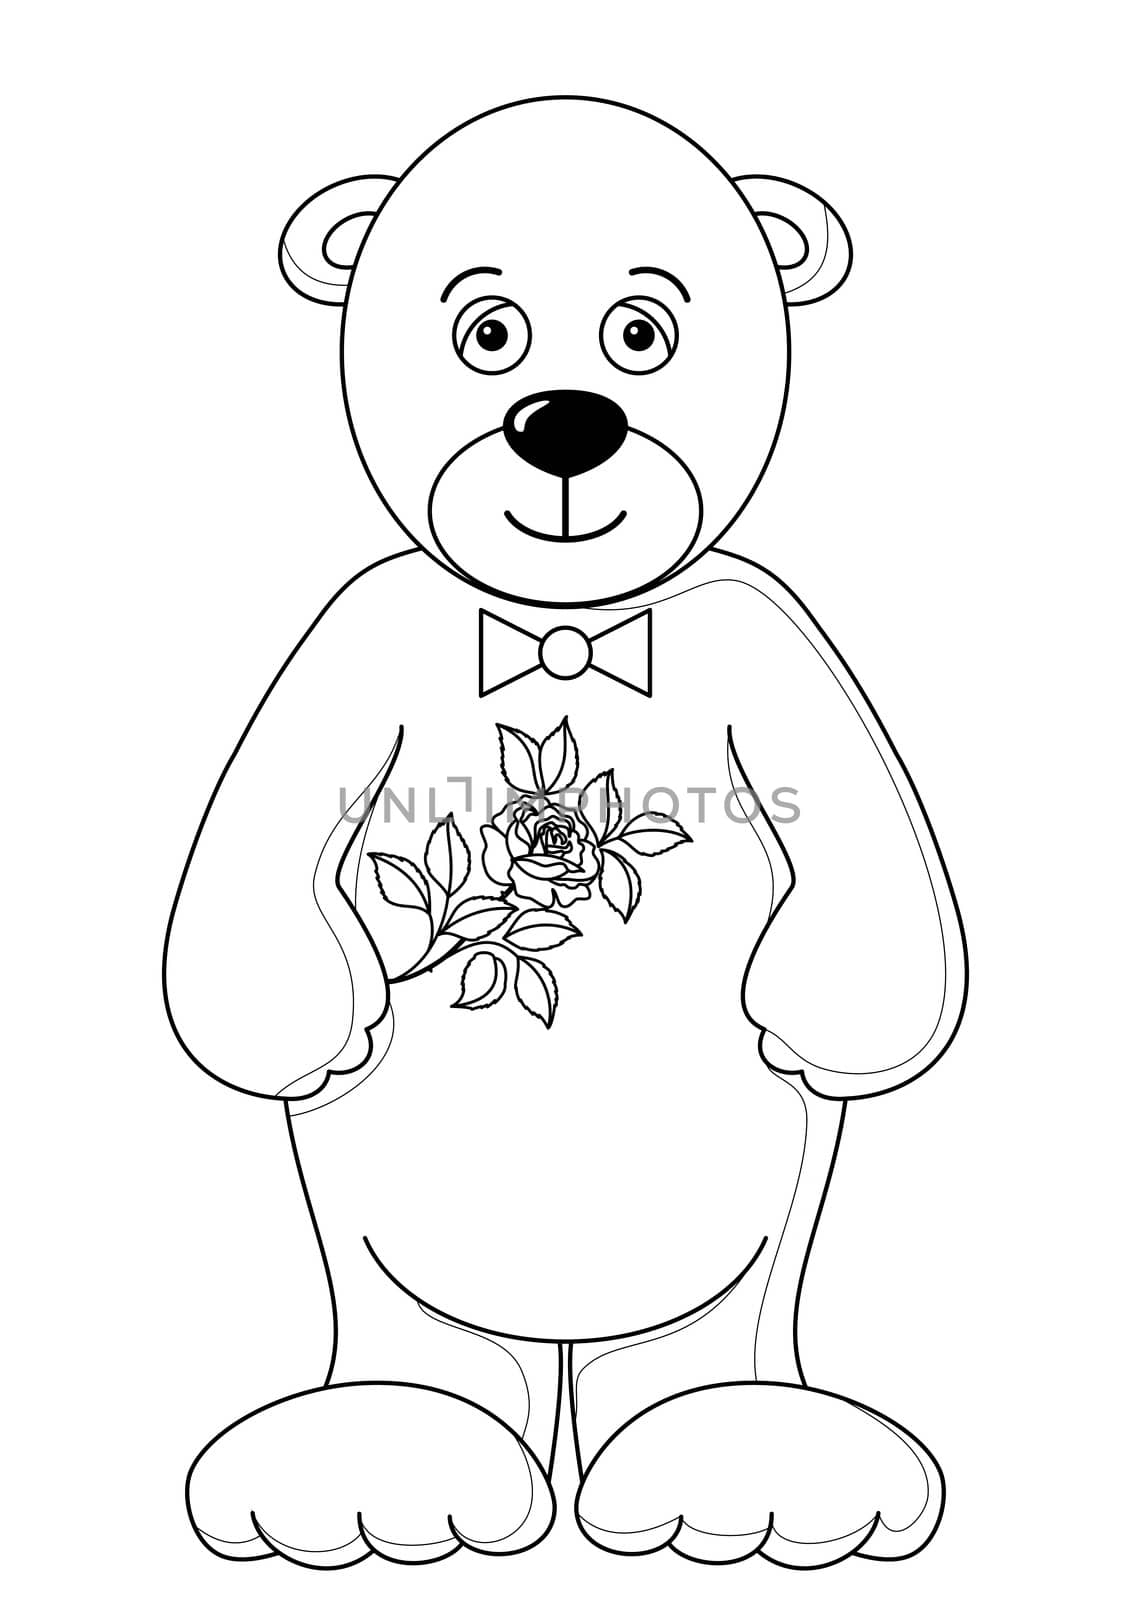 Teddy bear with flower, holiday toy, isolated, contours